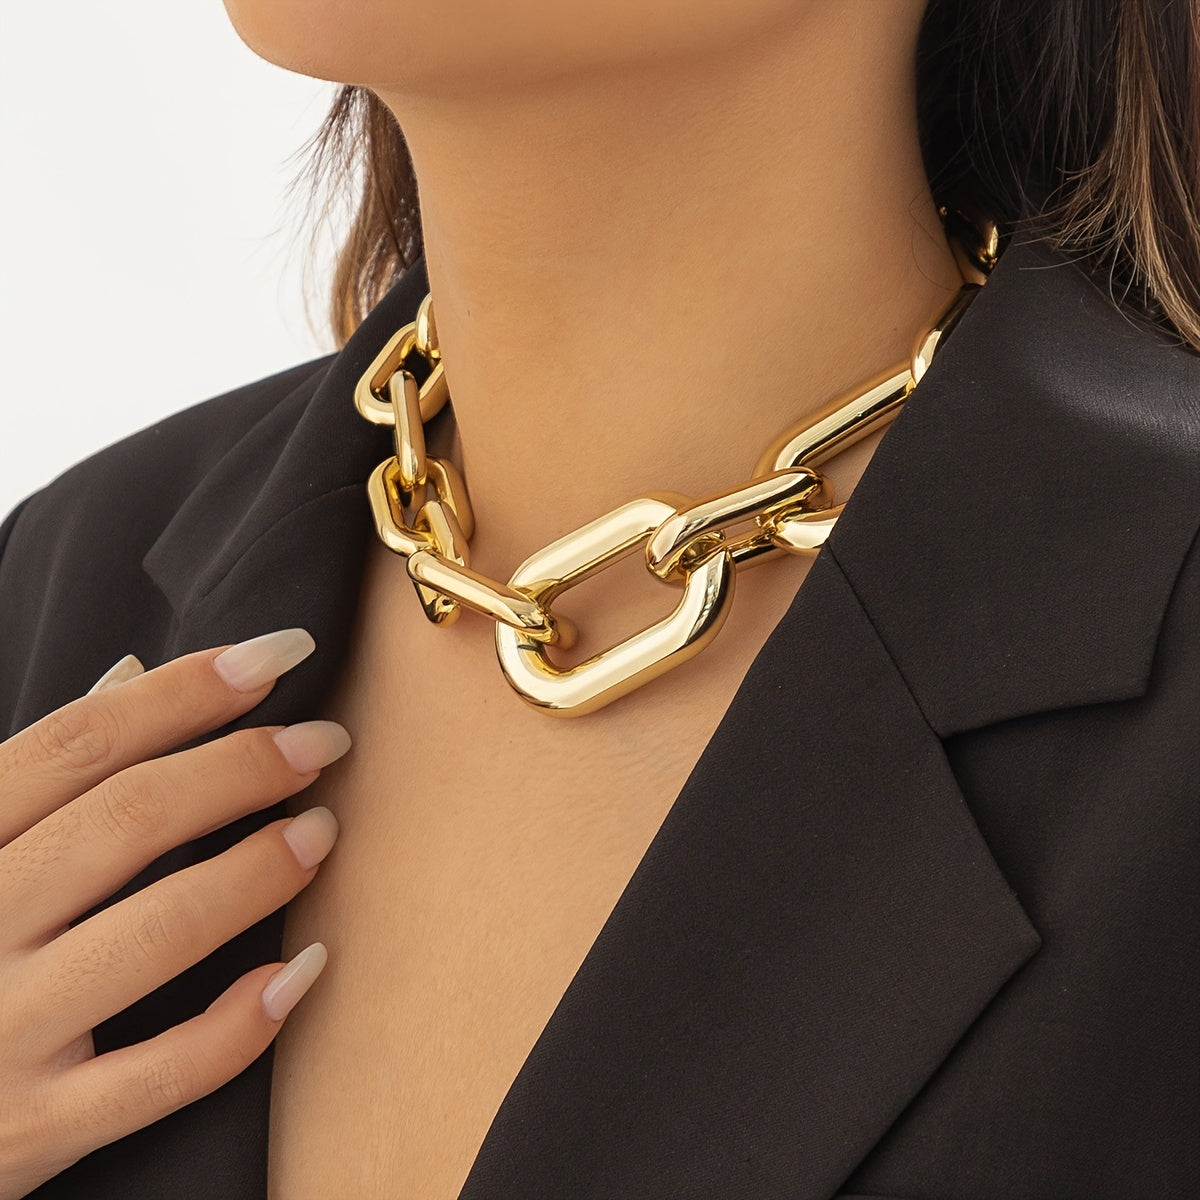 Make a Statement with this Exaggerated Chunky Chain Necklace - Perfect for Women's Parties!